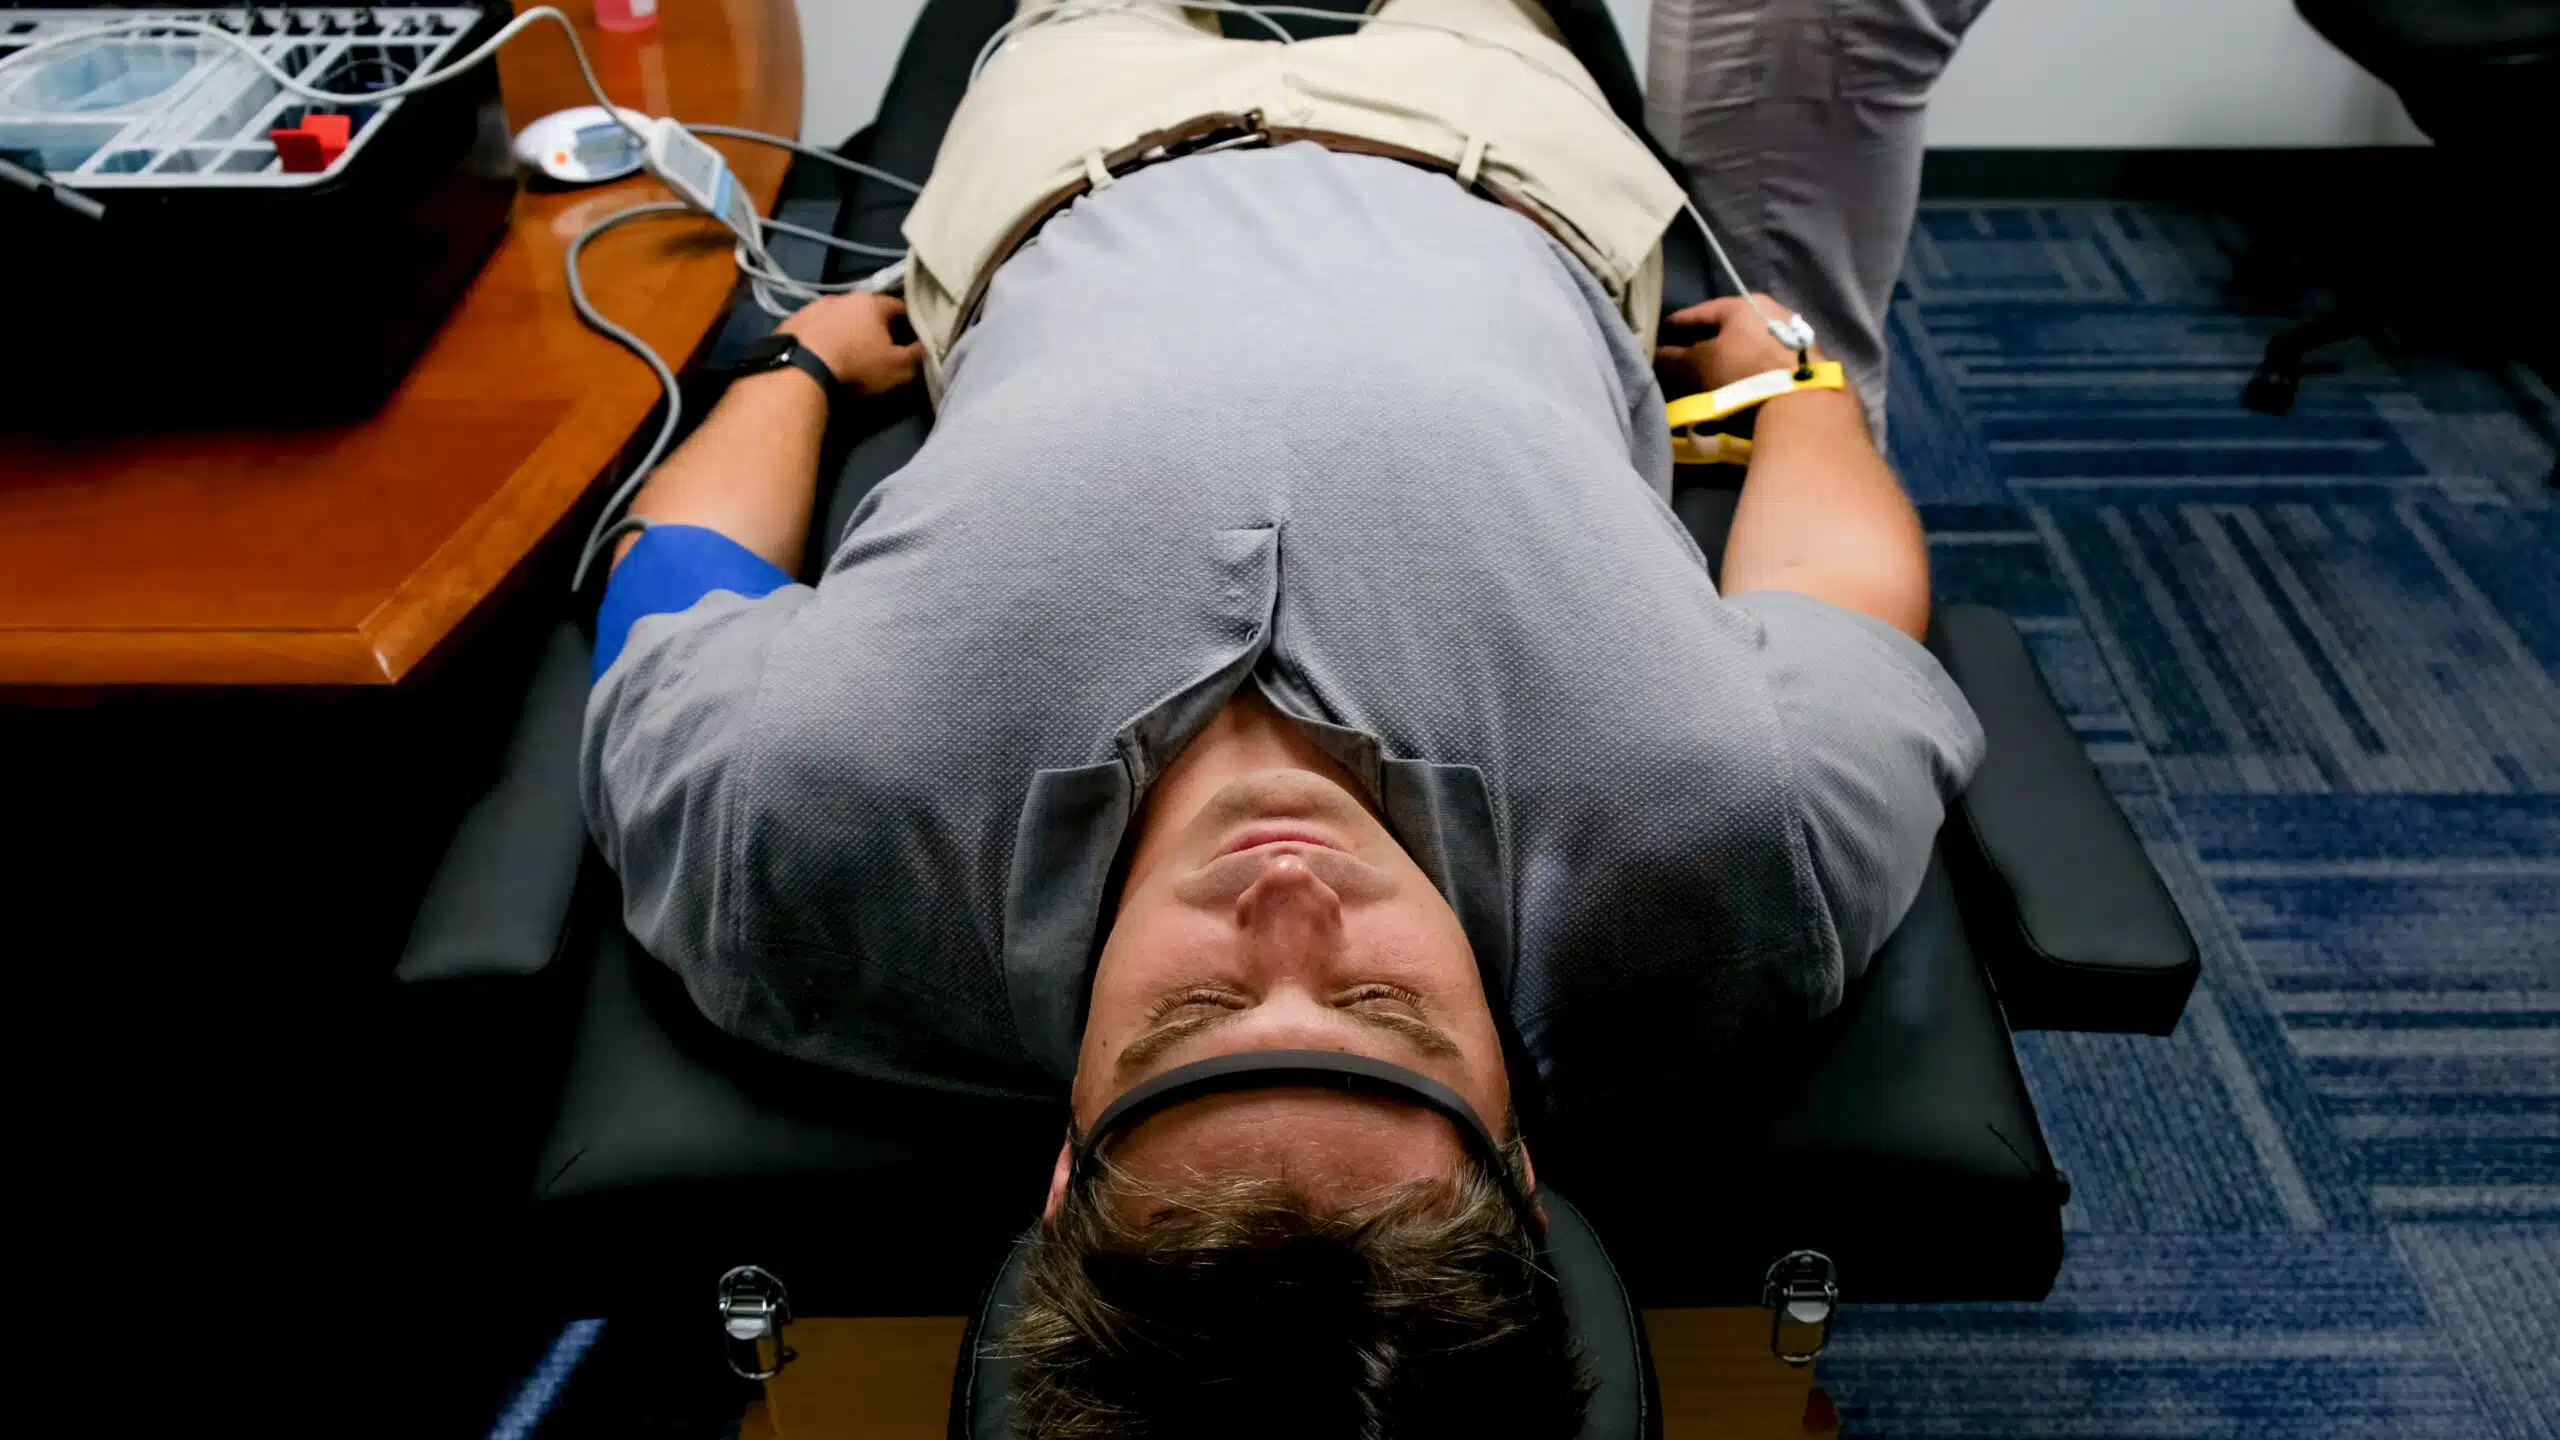 Man participating in AWARE Program stress and fatigue test.